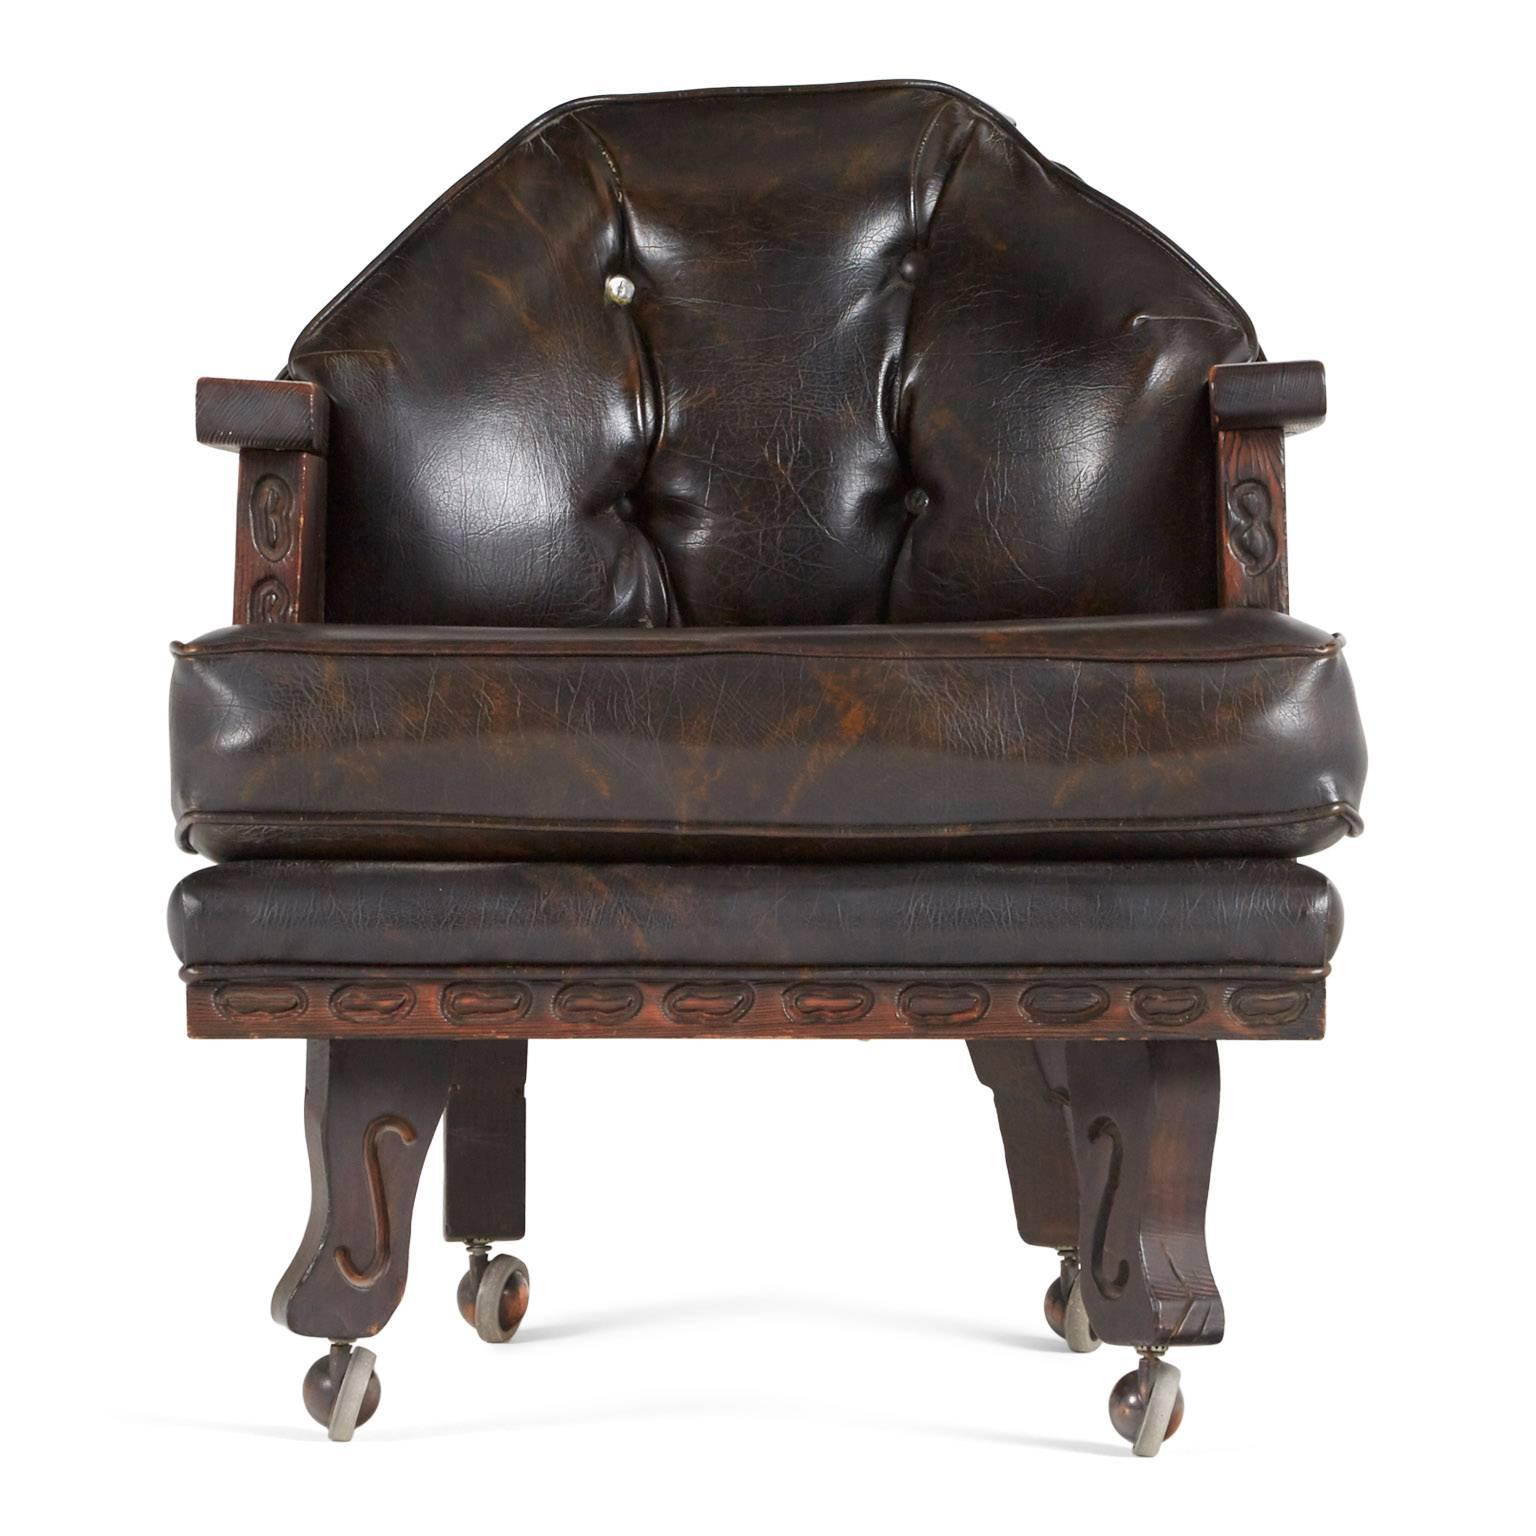 This ornately crafted red walnut club chair with carved exotic details is a testament to William Westenhaver's Modern Primitive creations. Influenced by Polynesian natives sculpting their ancestral deities in to wood furnishings, Westenhaver fused